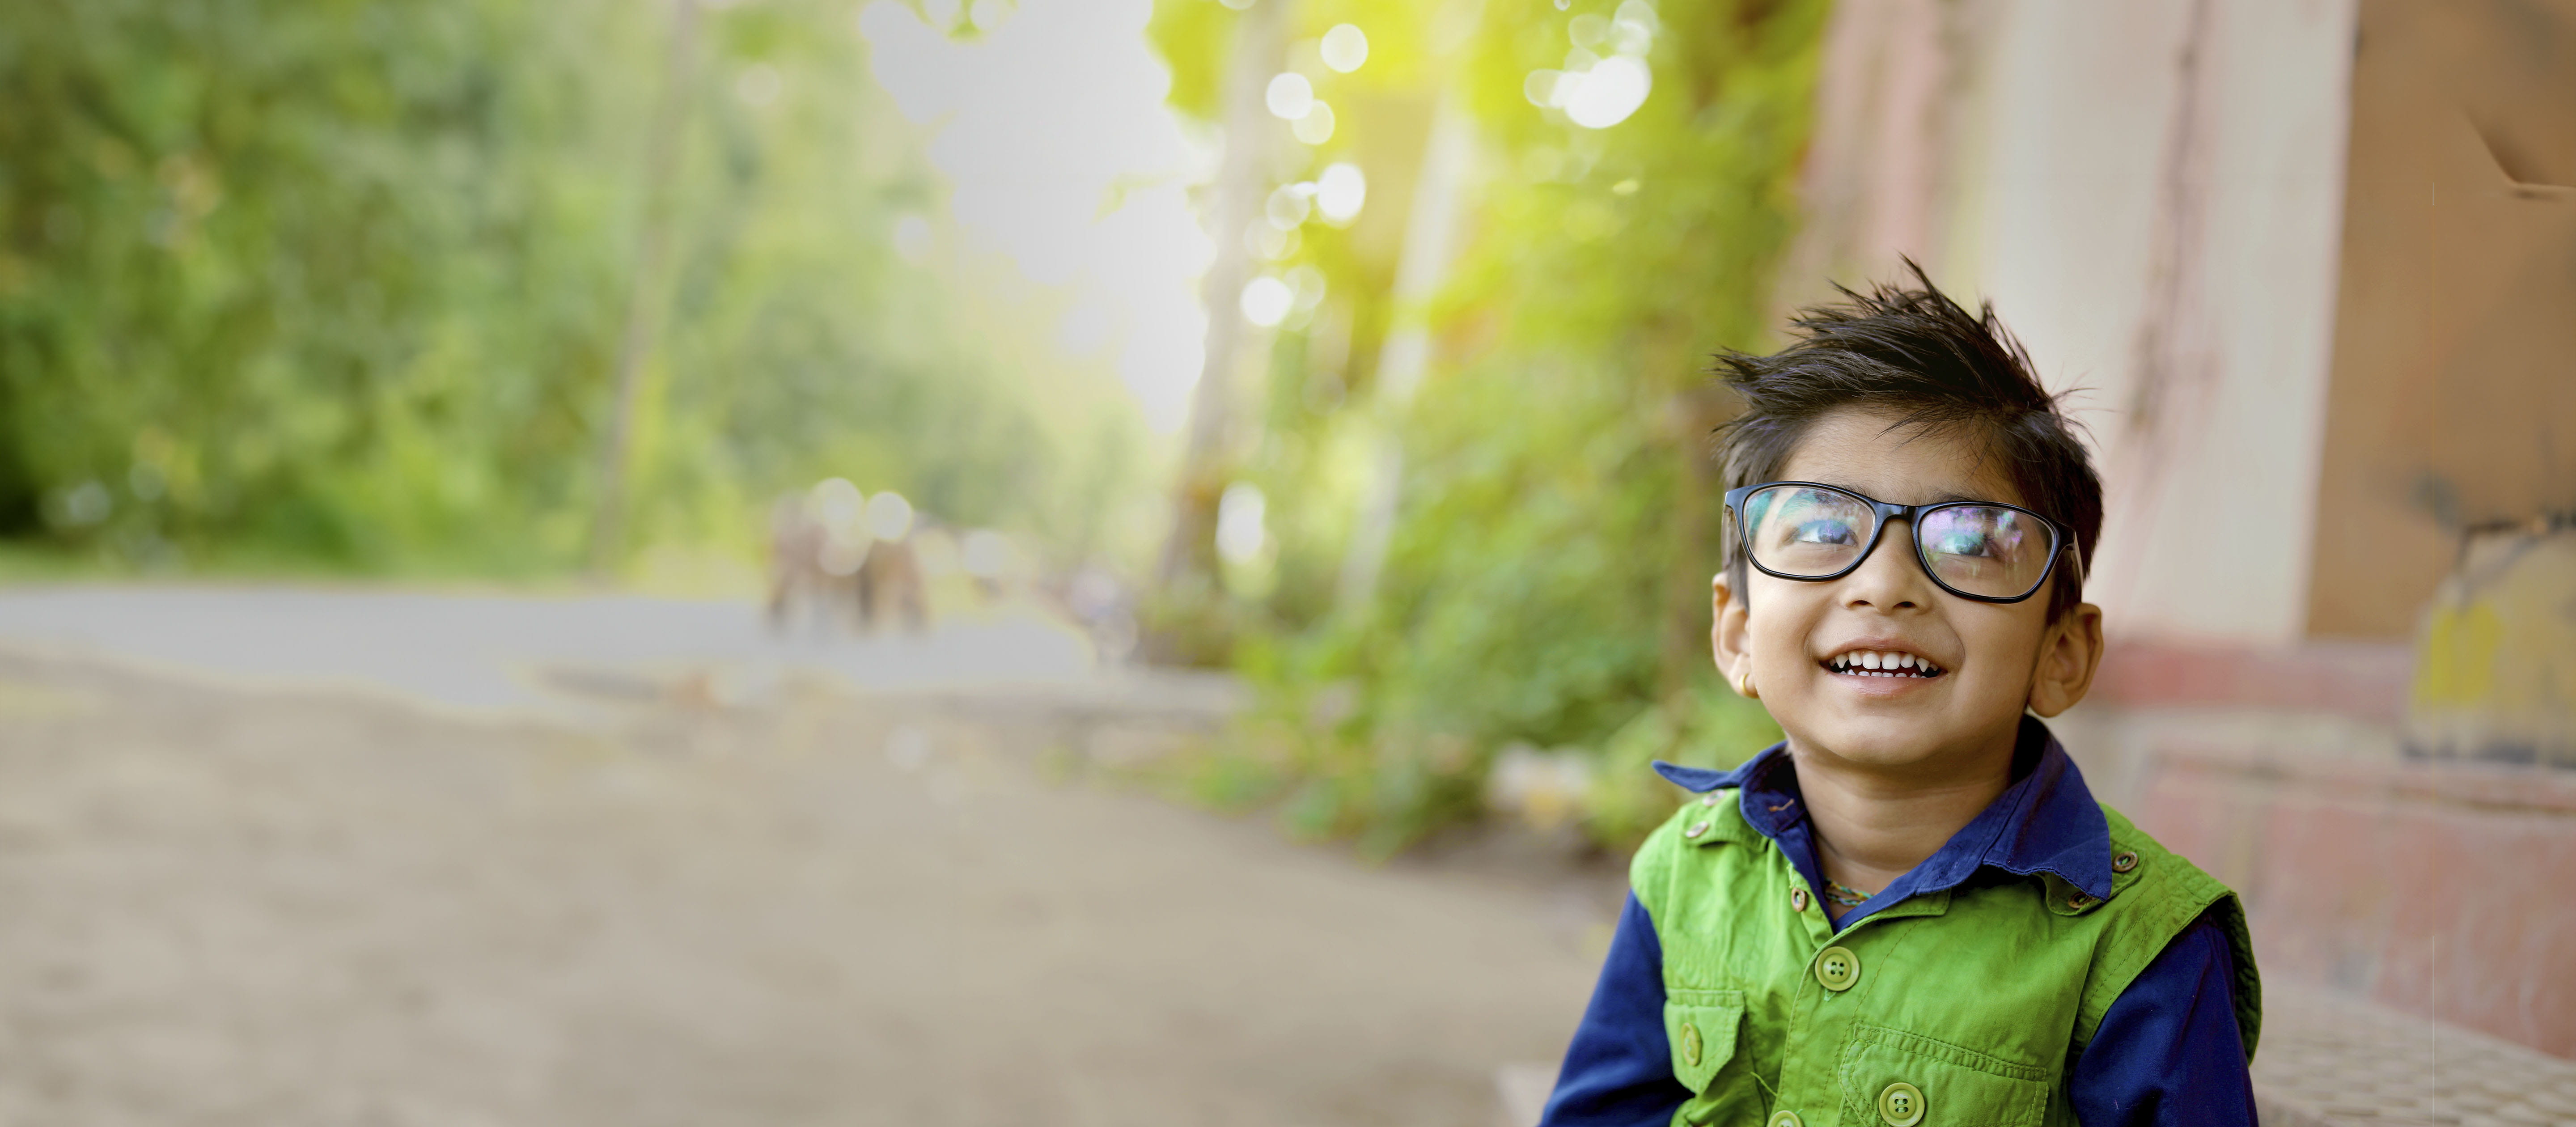 Smiling boy wearing blue and green wearing glasses.